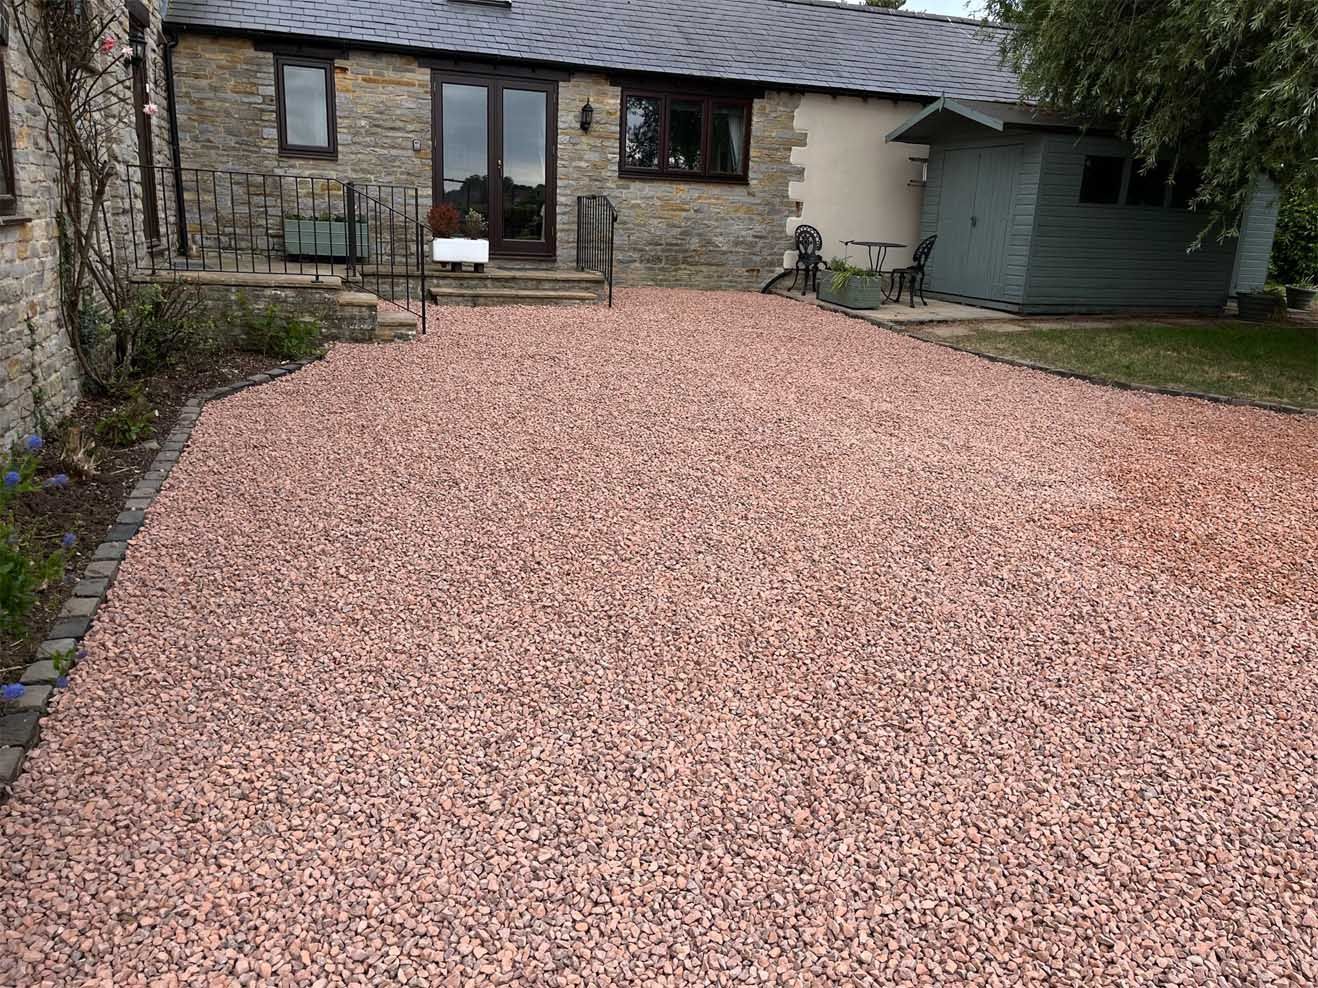 A gravel driveway infront of a house